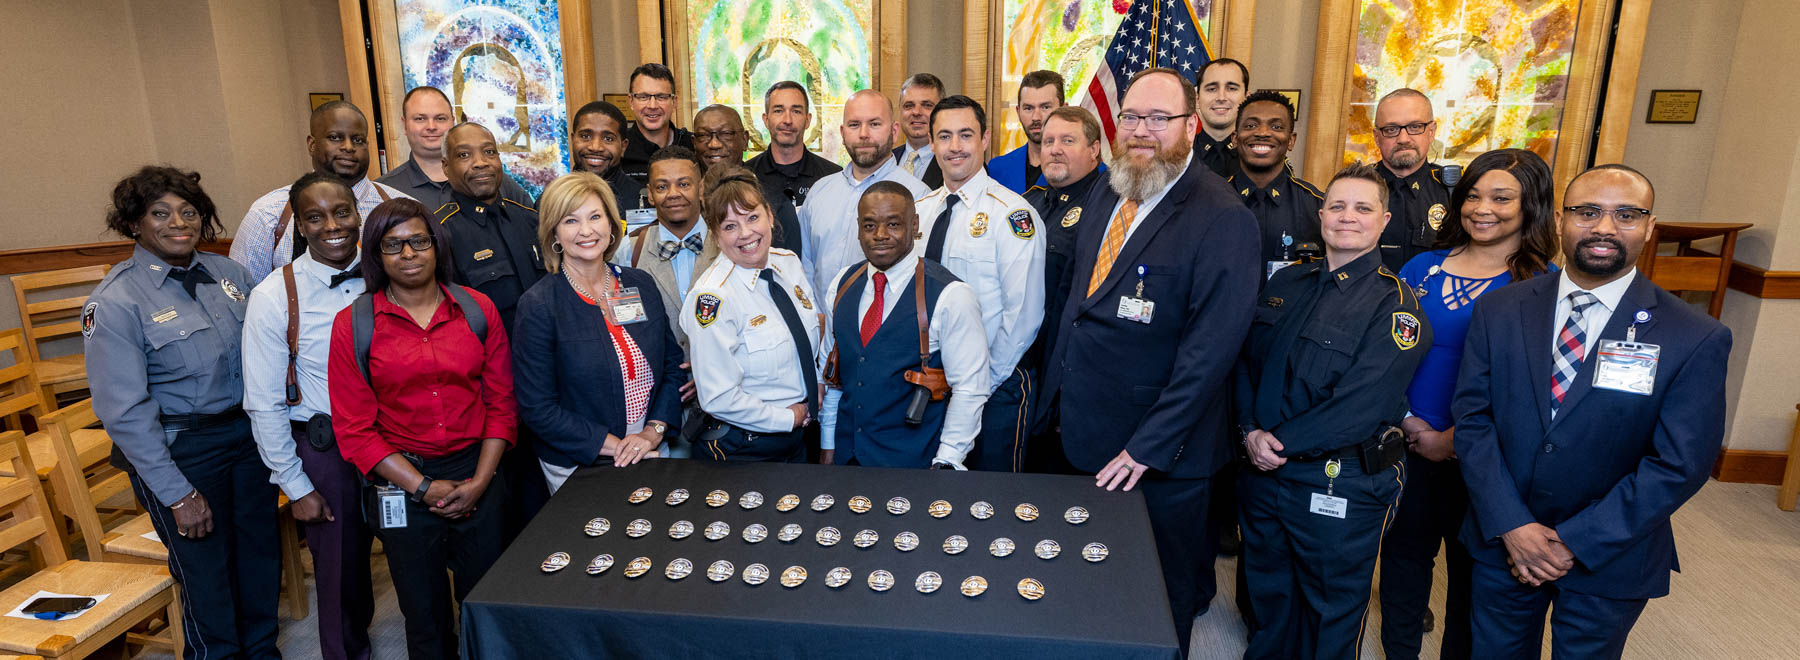 A number of UMMC police and security officers and staff from the Mississippi Center for Emergency Services were on hand Sept. 1 for the Blessing of the Badges ceremony at the University Hospital Chapel. Jay Ferchaud/ UMMC Communications